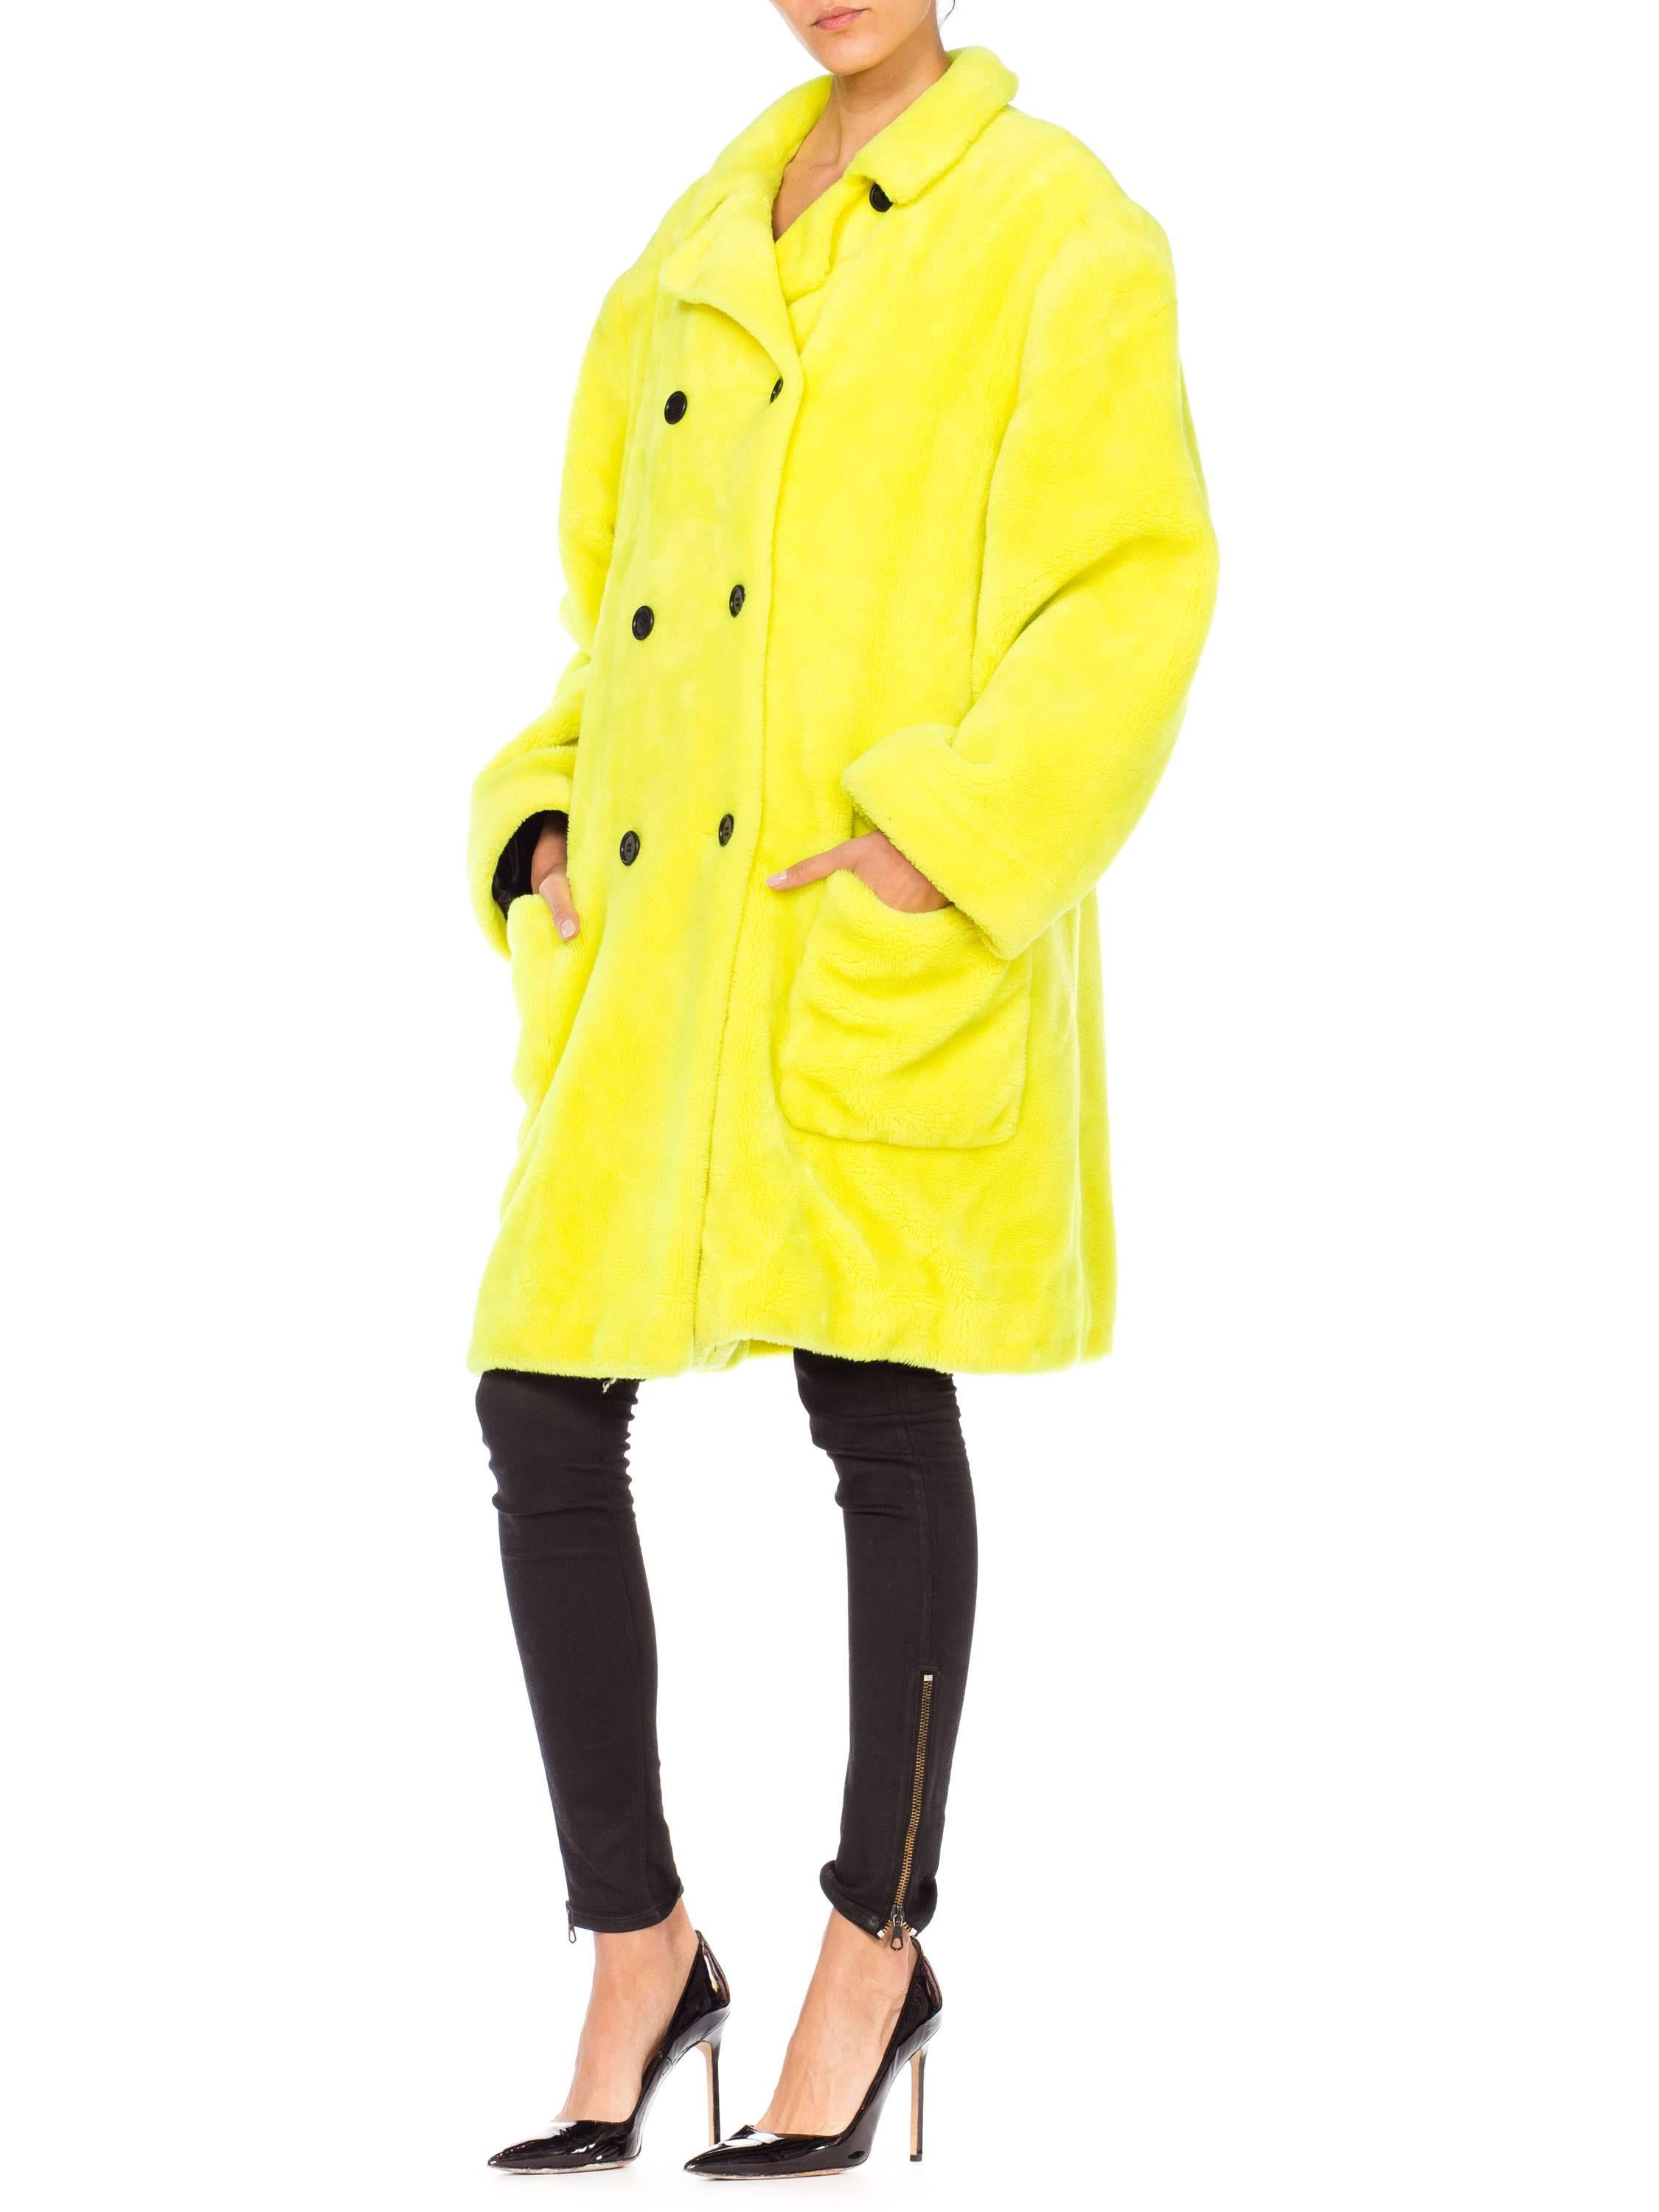 Stephen Sprouse Oversized Highlighter Yellow Faux Fur Coat, 1980s  1